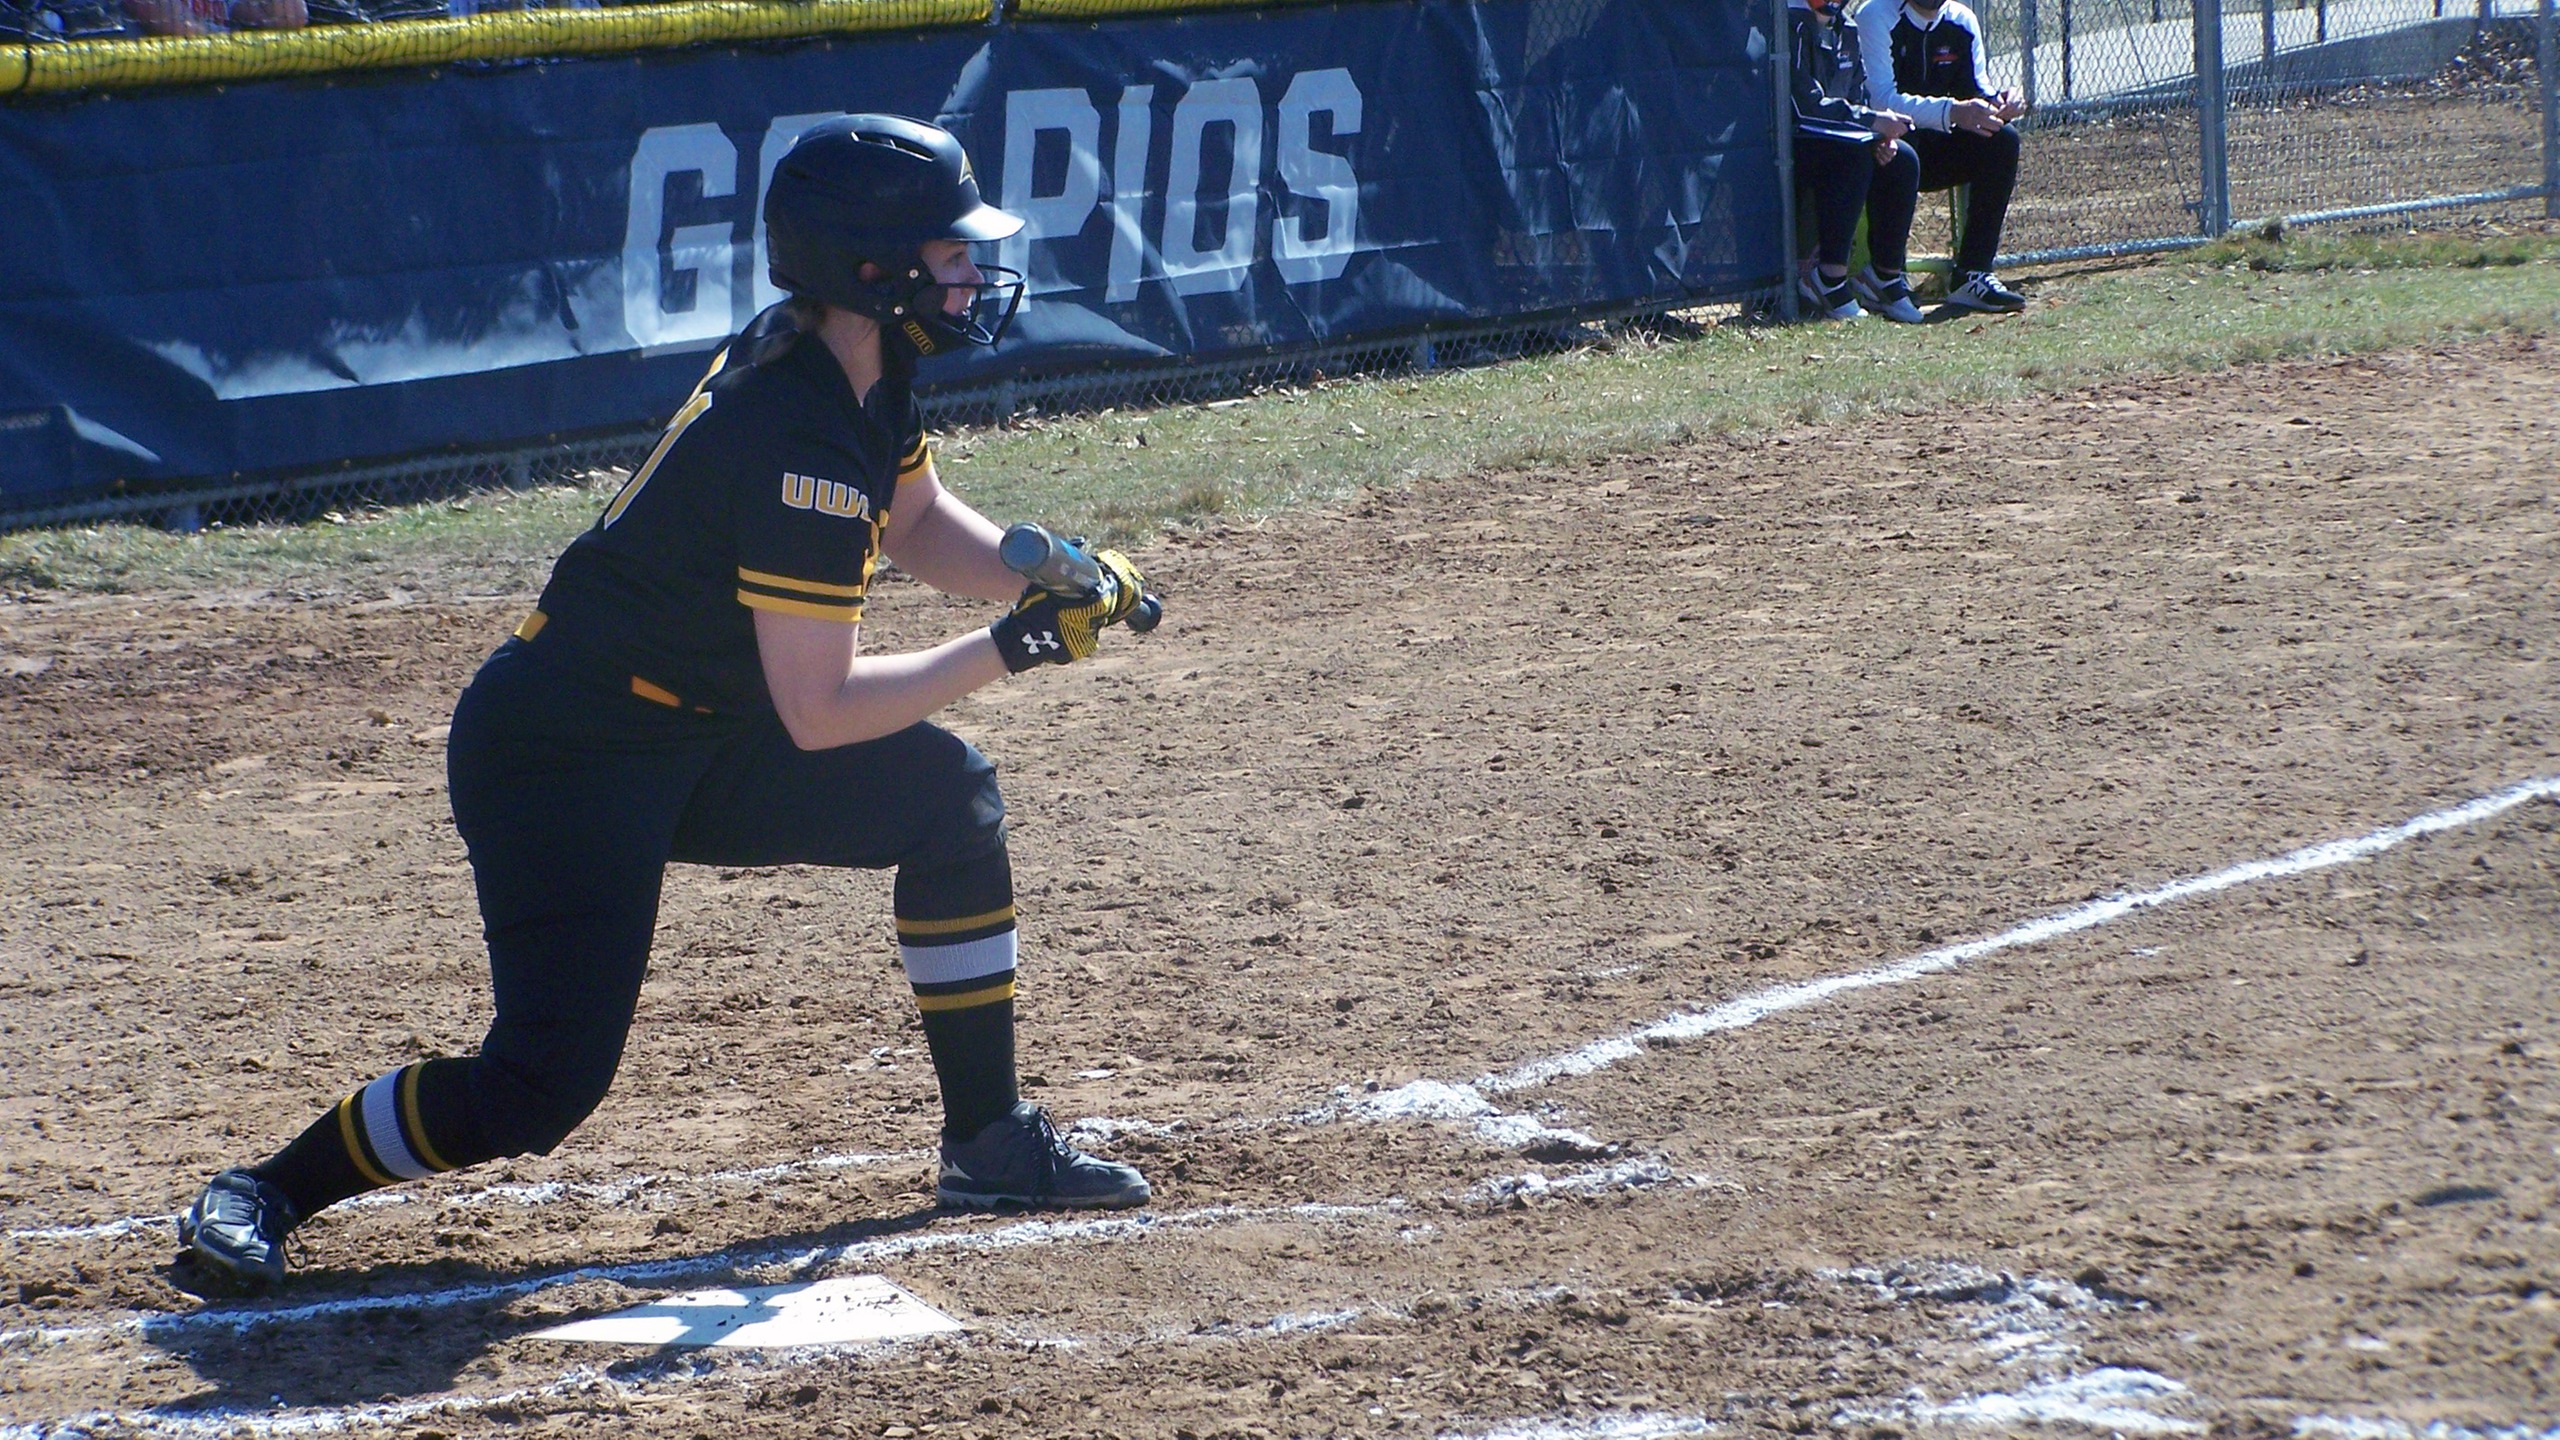 Amanda Mc Ilhany gave UW-Oshkosh a 2-1 lead with her fourth-inning squeeze bunt during the Titans' second game against the Pioneers.